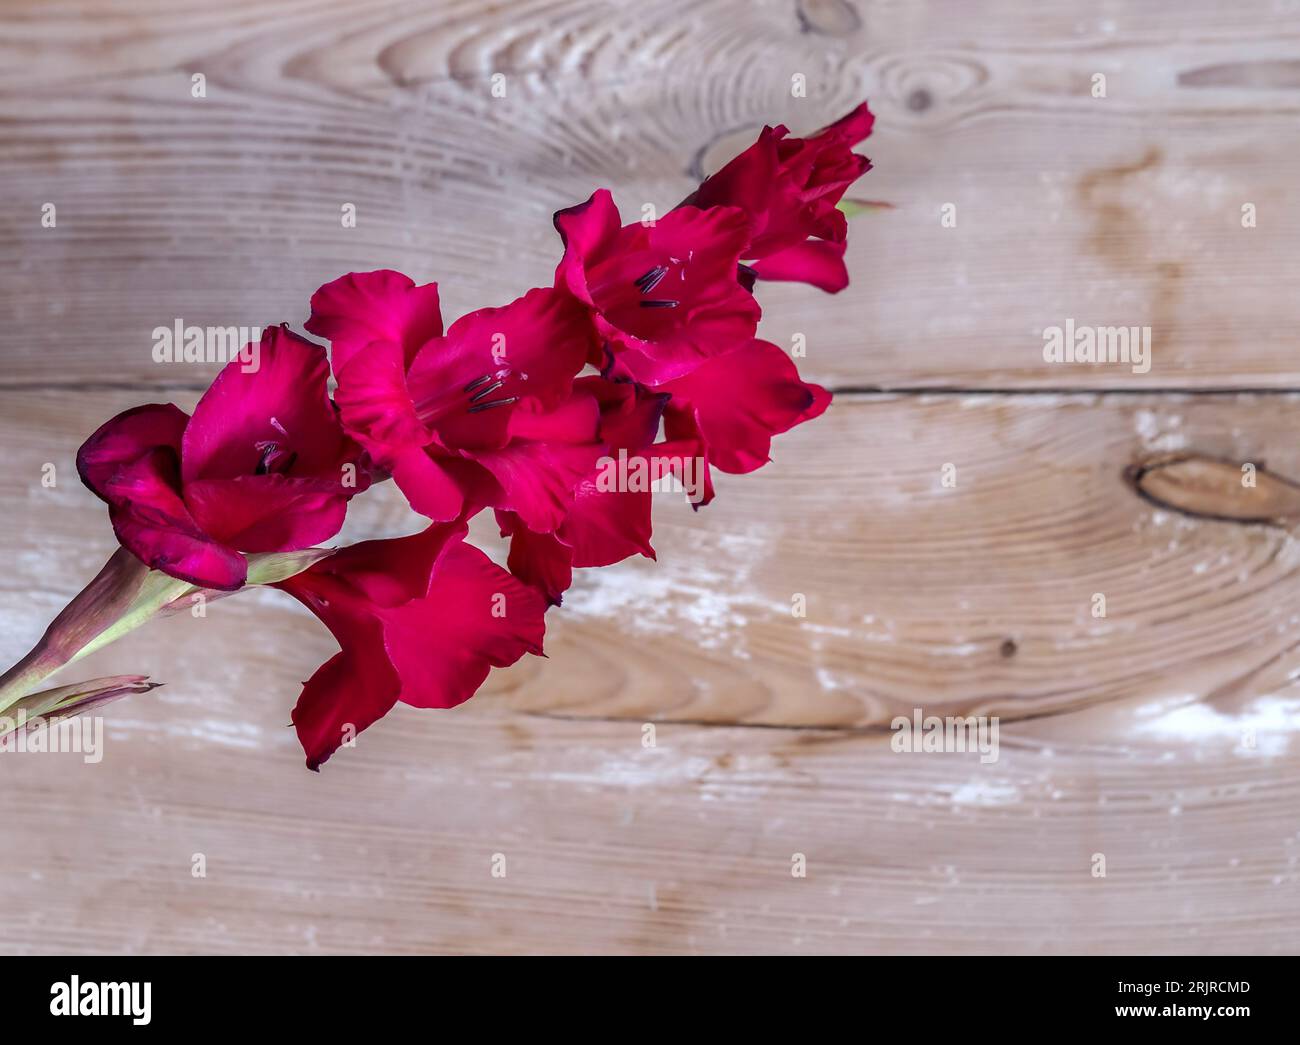 Gladiolus flowers, multi-flowered inflorescence, colorful spiky decorative plant, close-up against the background of wooden planks Stock Photo